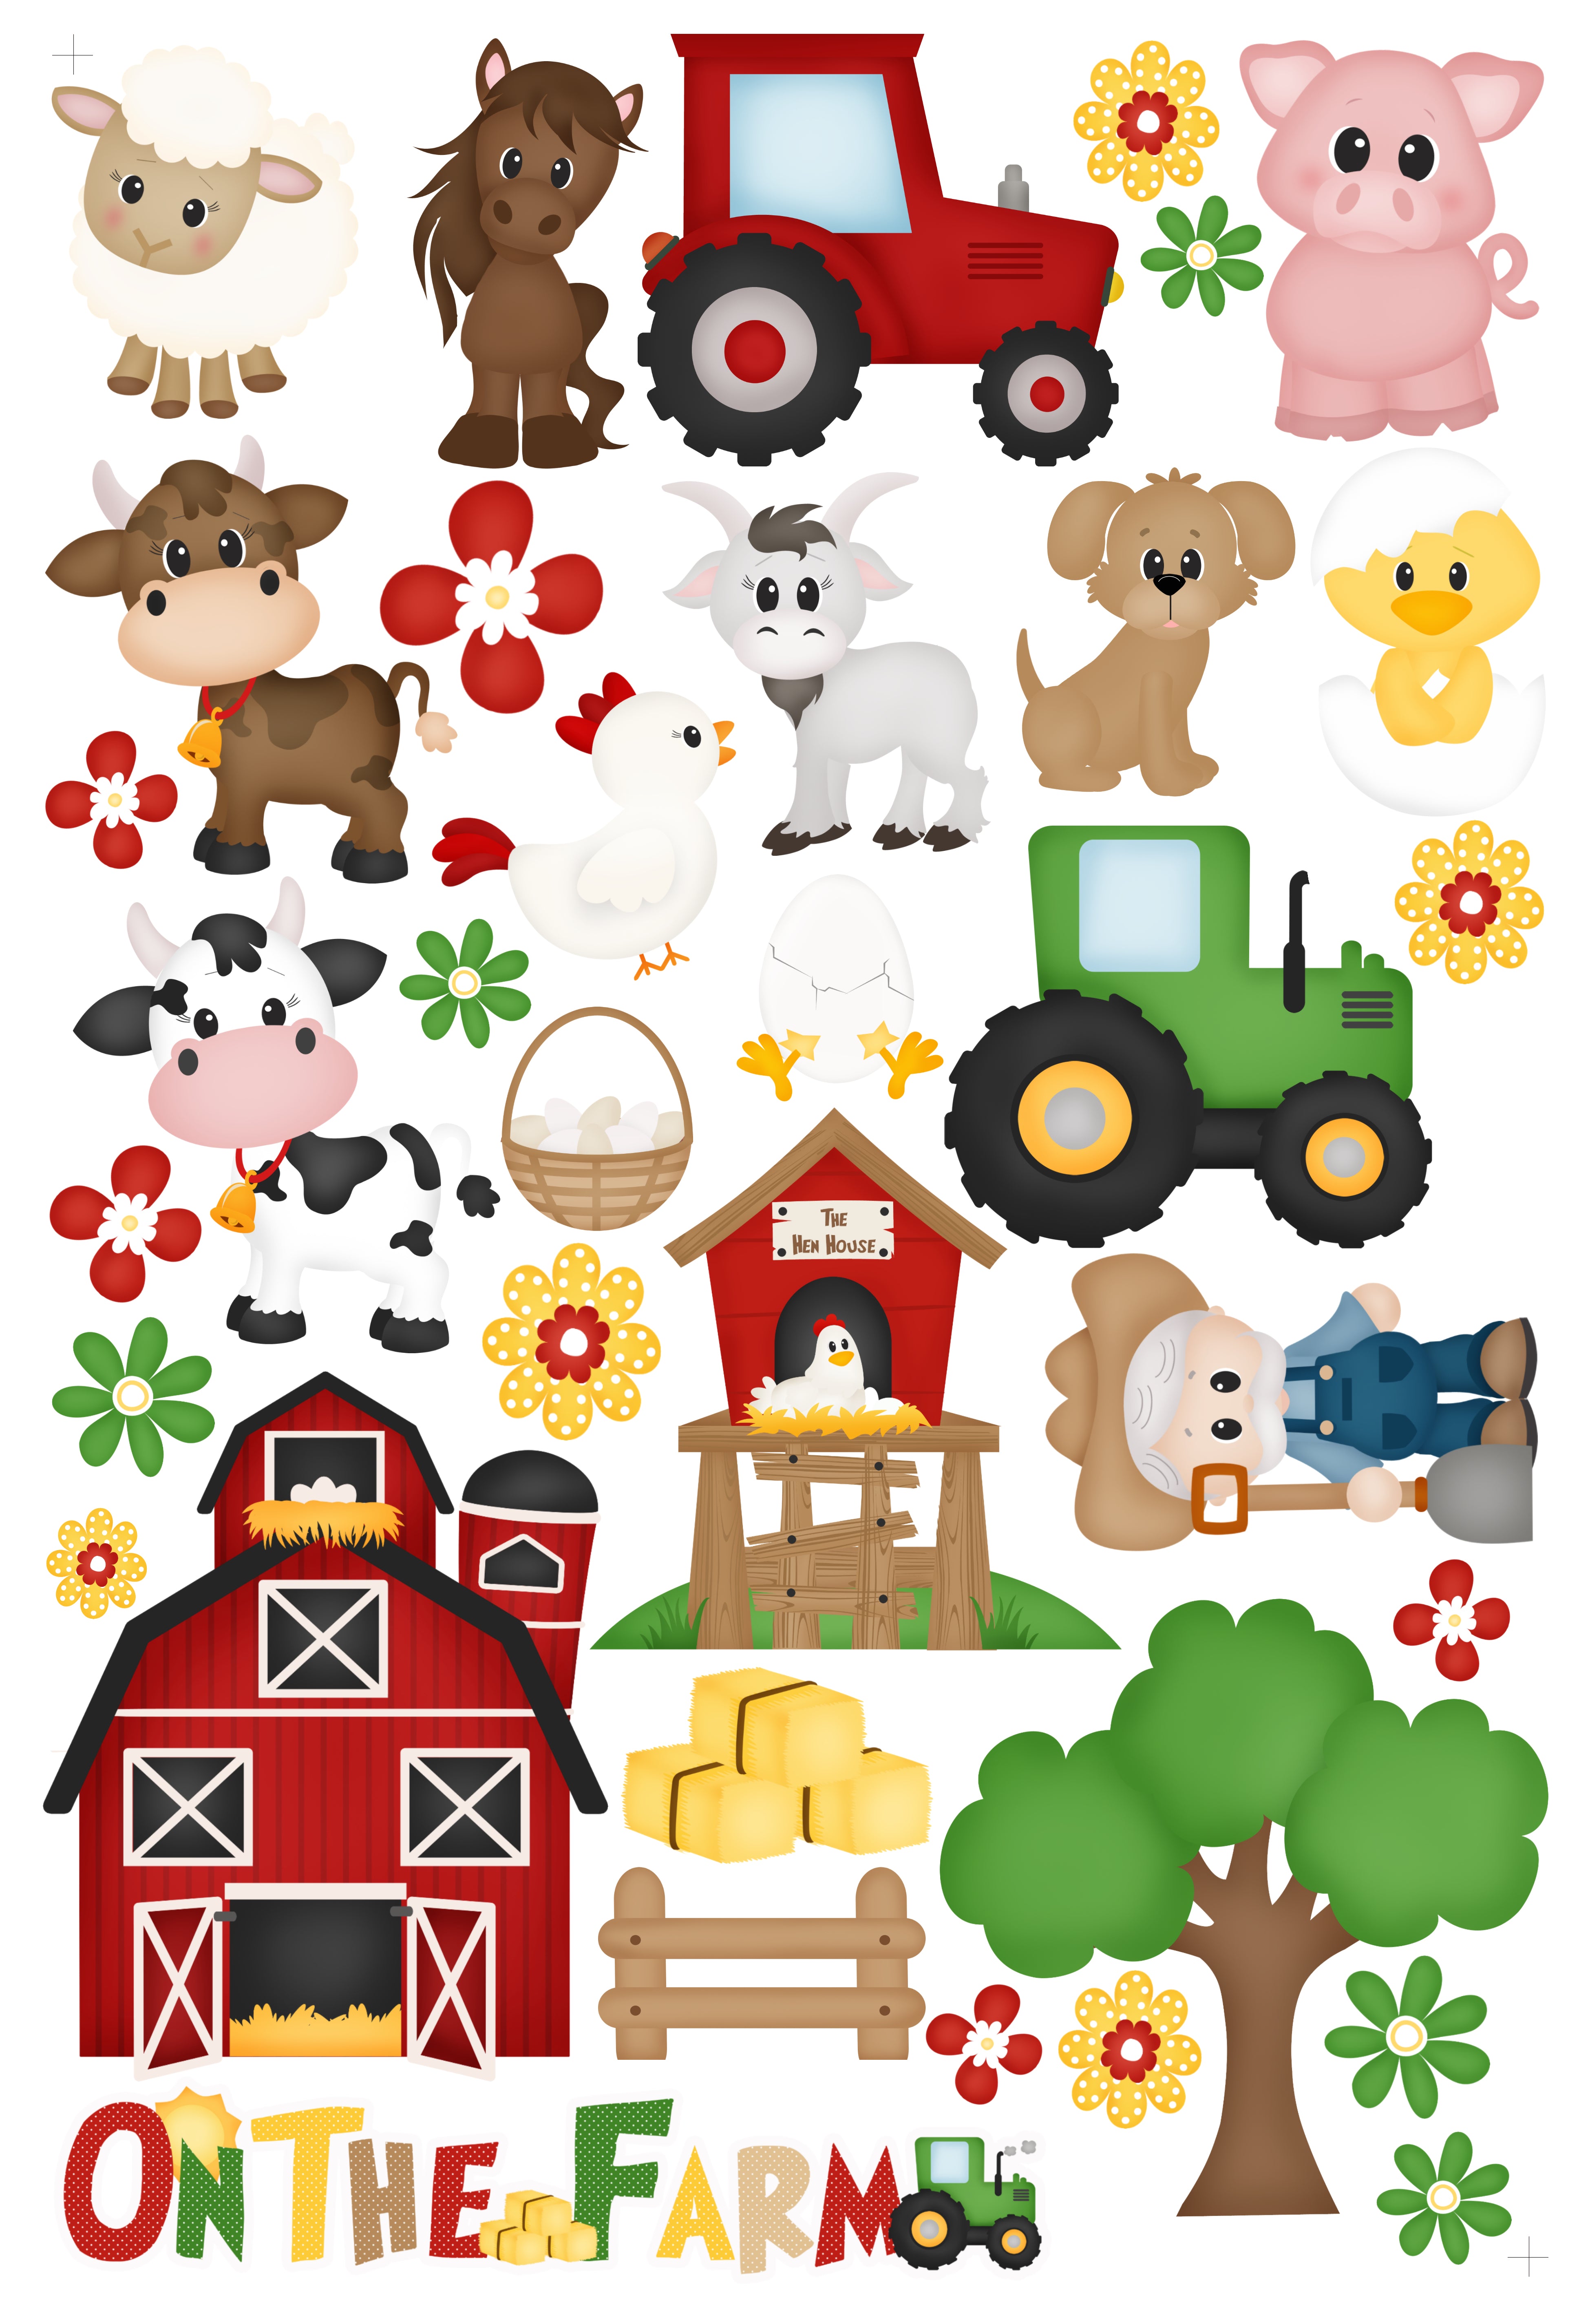 On The Farm 12 x 12 Scrapbook Paper & Embellishment Kit by SSC Designs